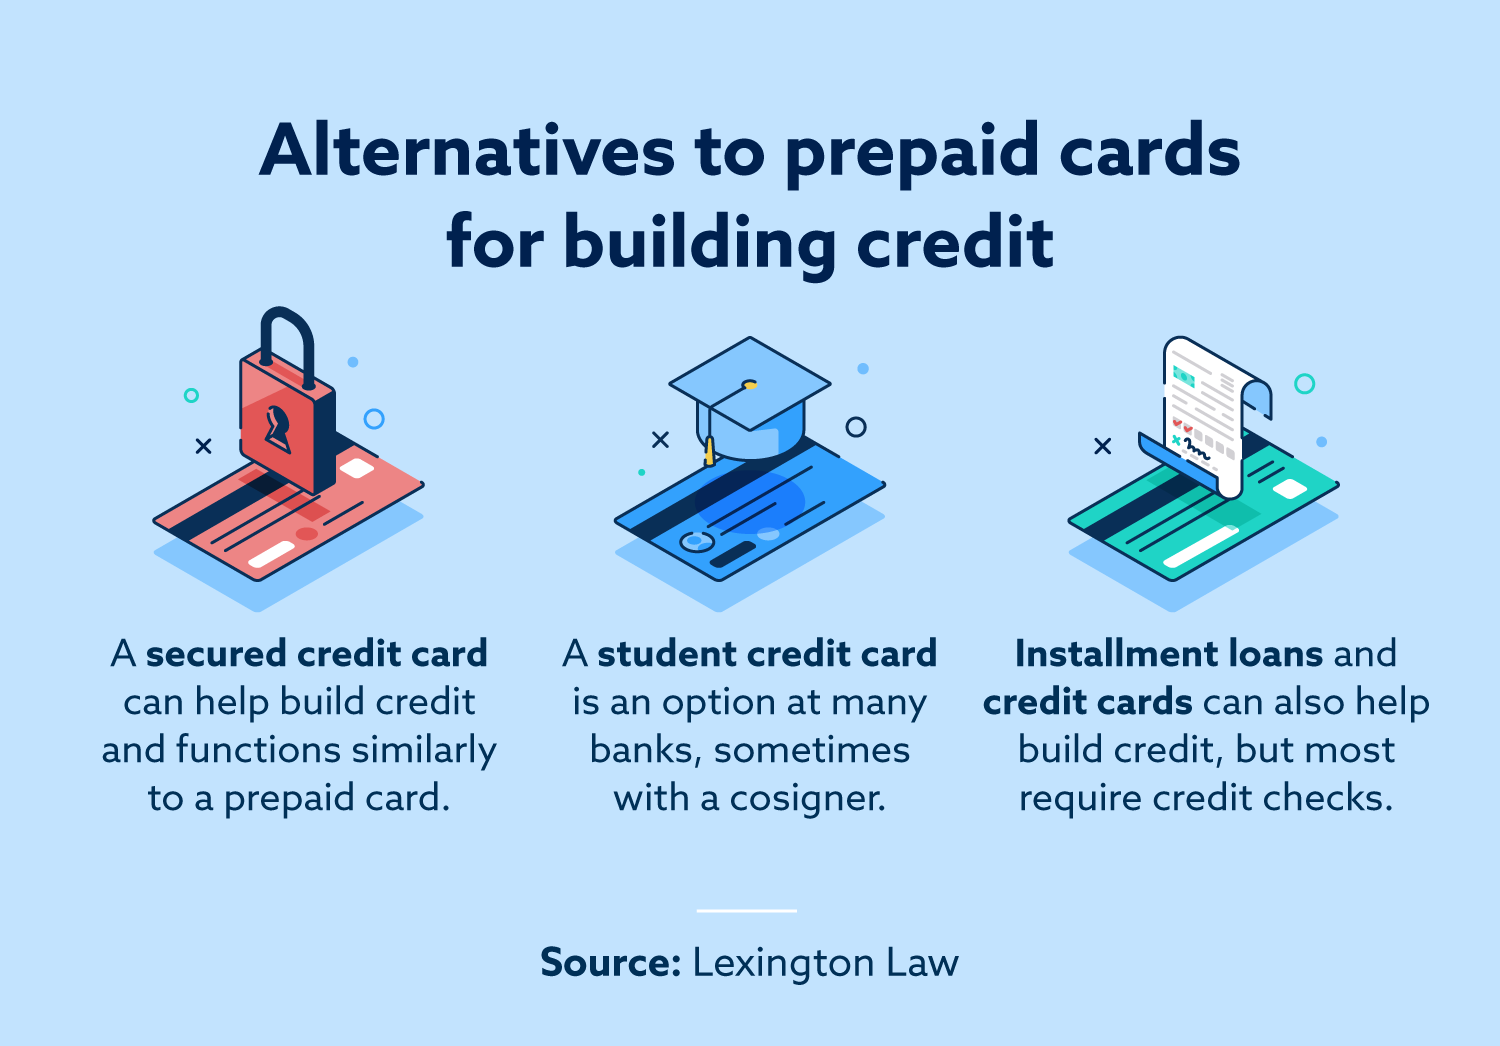 Alternatives to prepaid cards for building credit